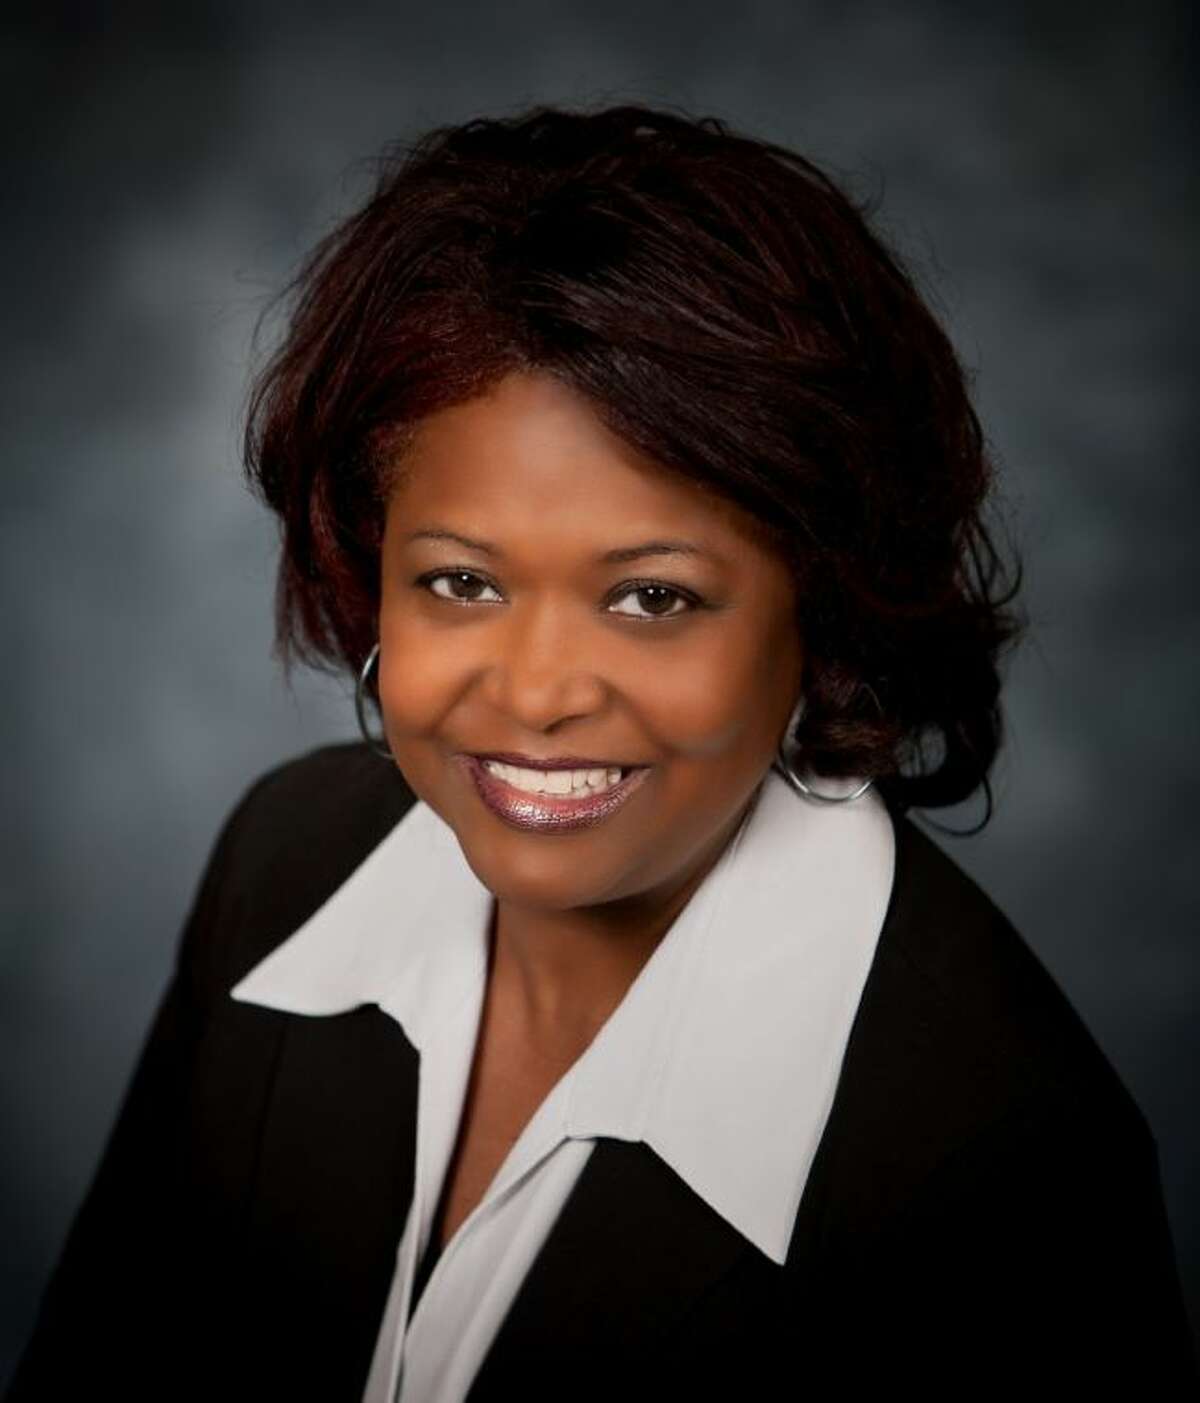 Carla Mills Windfront was recently appointed as the Southern Region Director for the National Black Caucus of School Board Members Board of Directors.